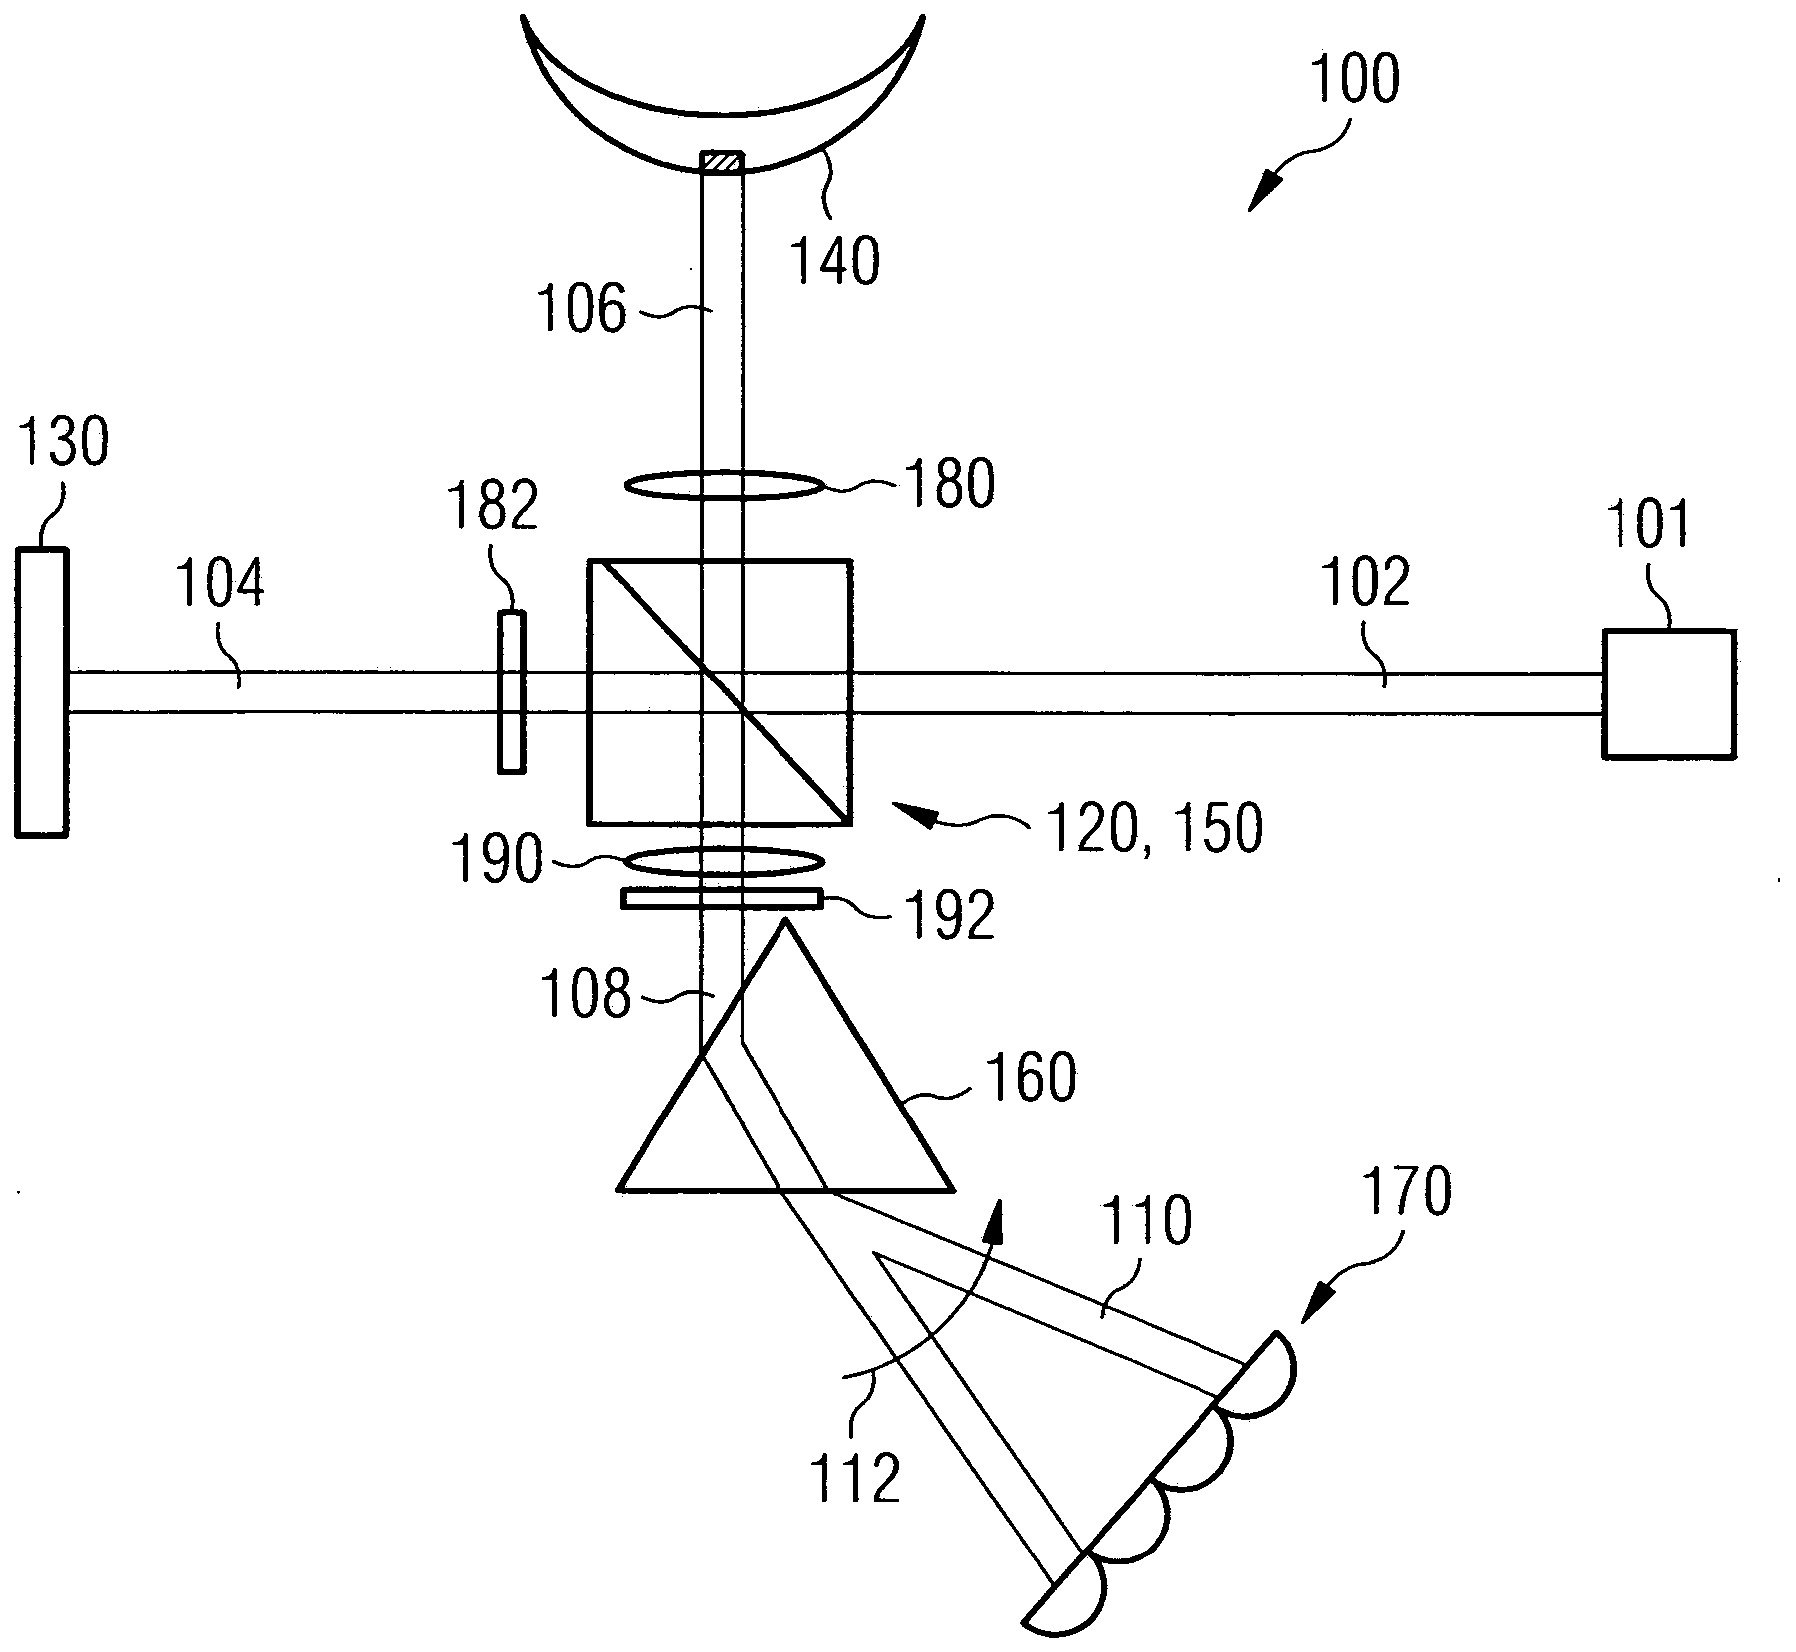 Apparatus and method for optical coherence tomography